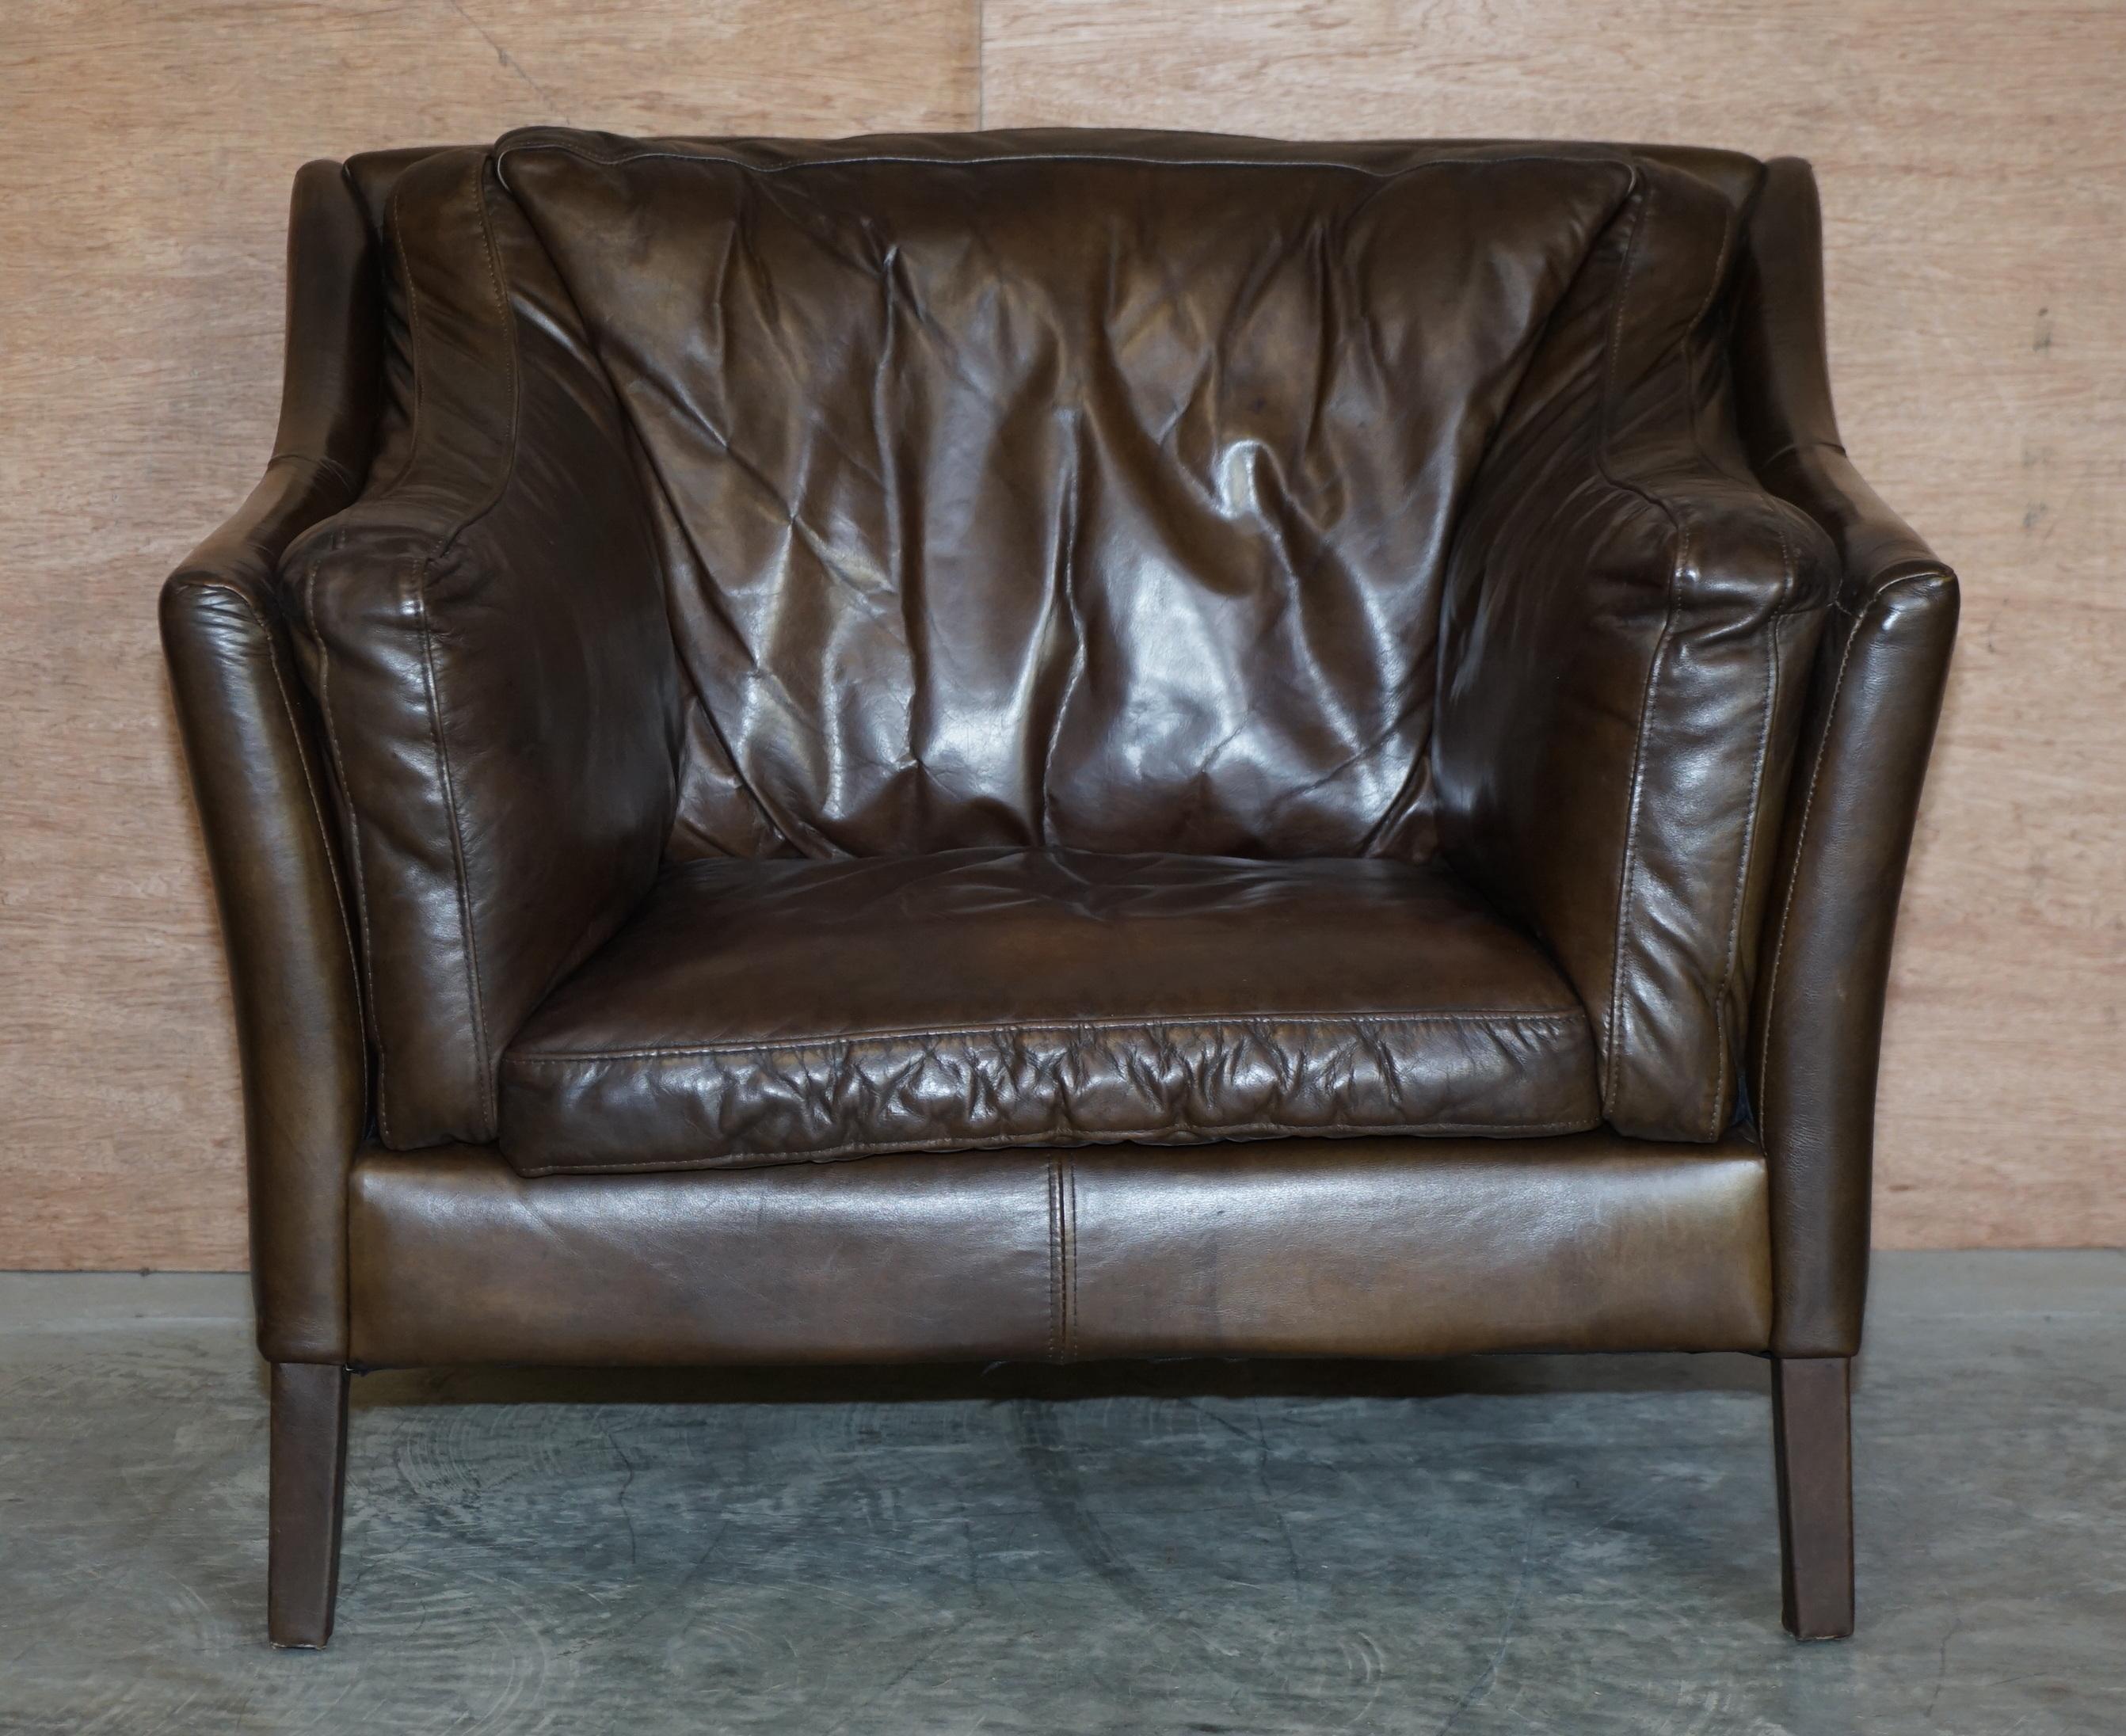 We are delighted to offer for sale this lovely Timothy Oulton Halo Reggio brown leather armchair or love seat

Now discontinued this is pretty much one of the most comfortable armchairs I have ever sat in, the leather has a nice chestnut finish,